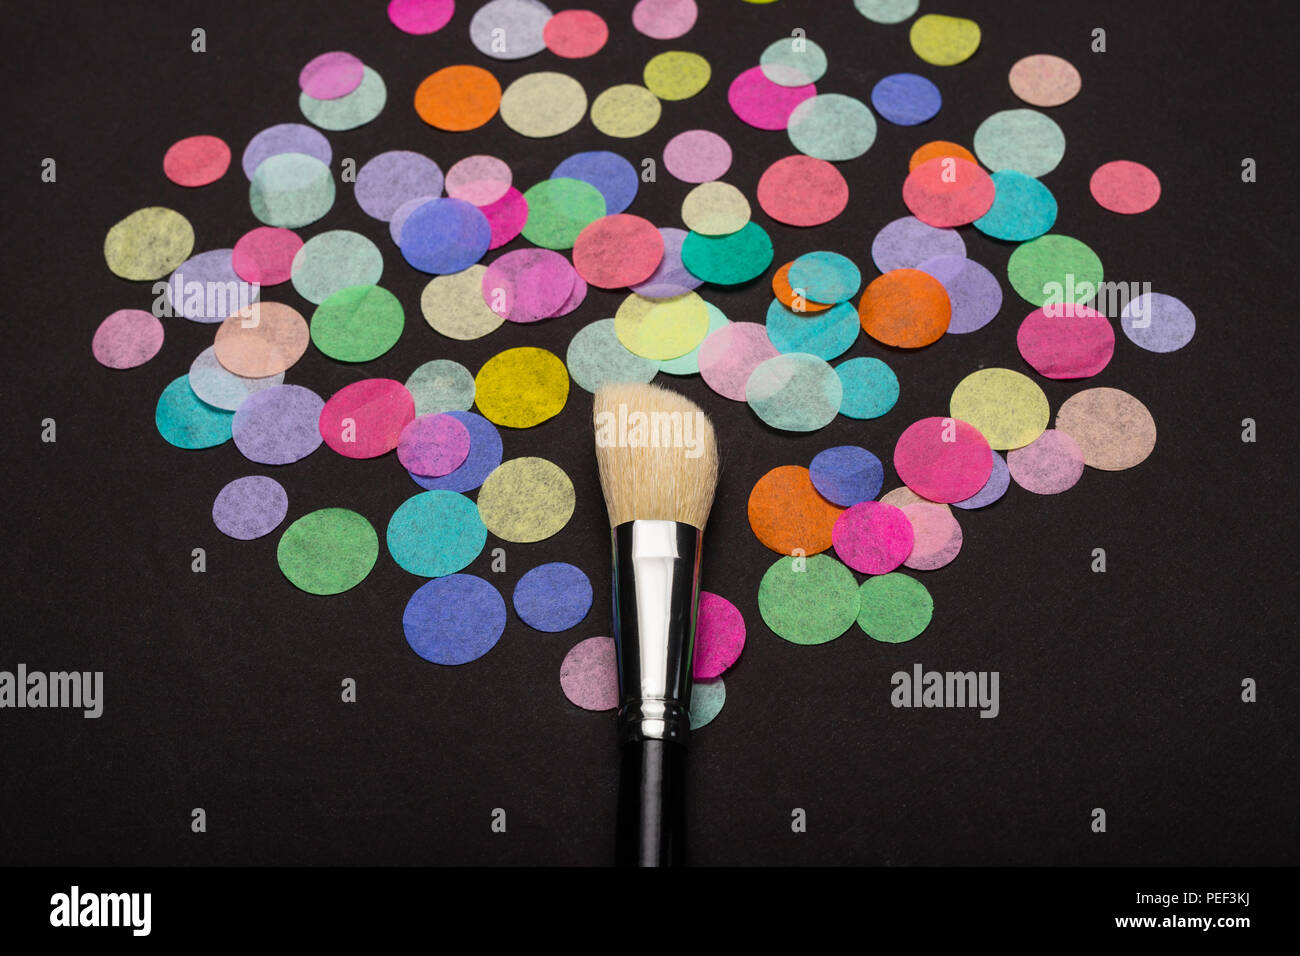 Close-up of makeup brush with colorful confetti Stock Photo